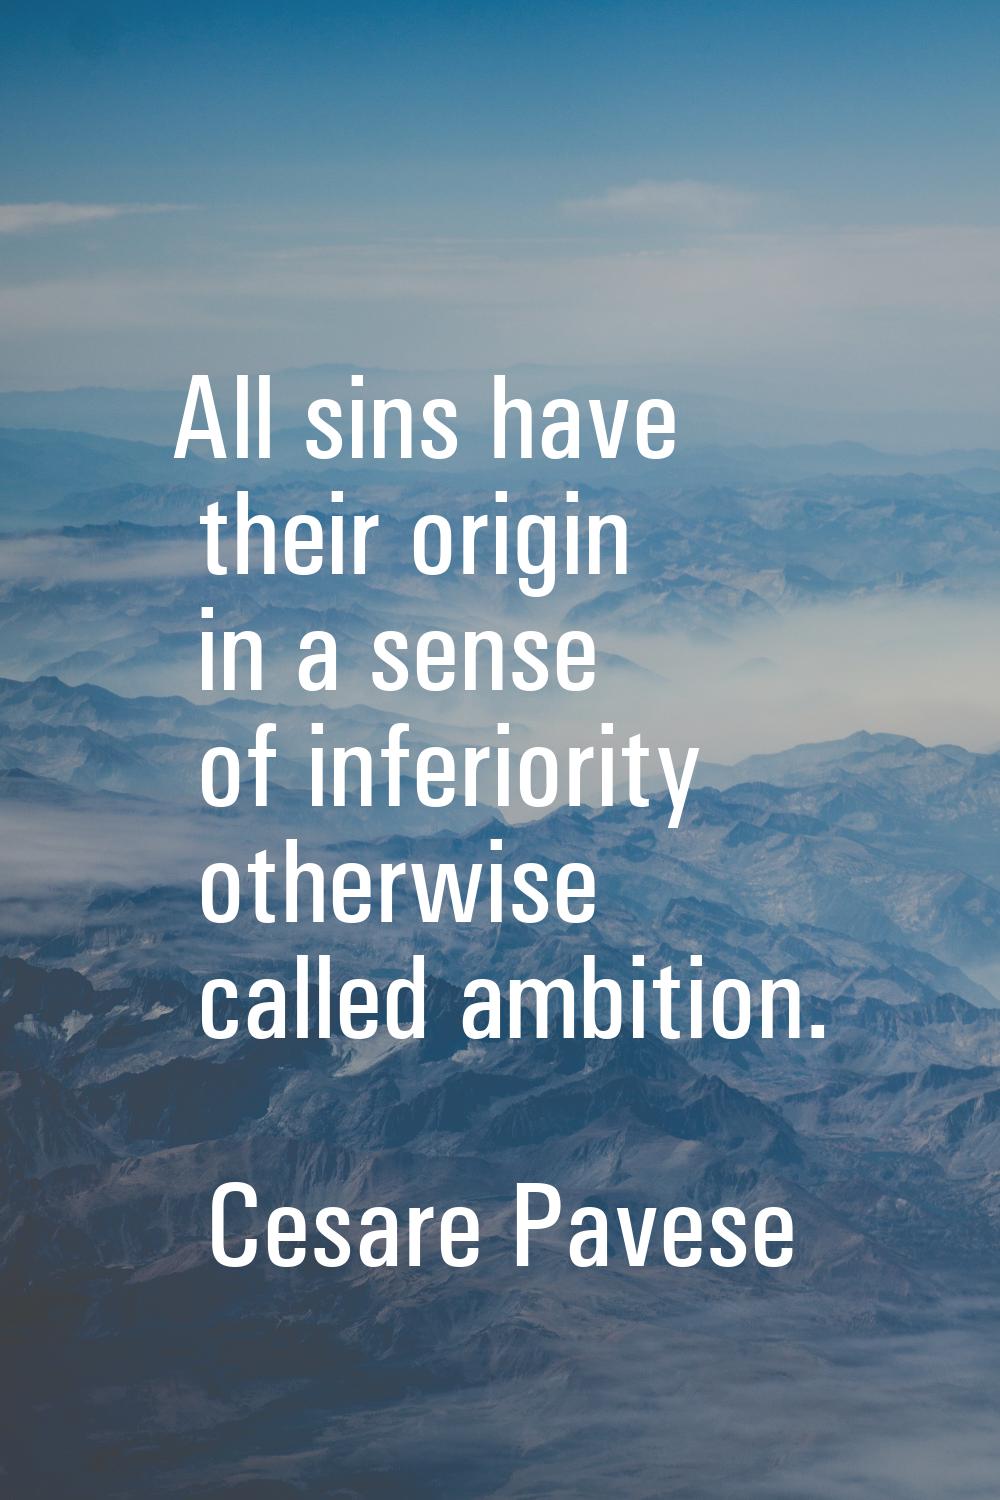 All sins have their origin in a sense of inferiority otherwise called ambition.